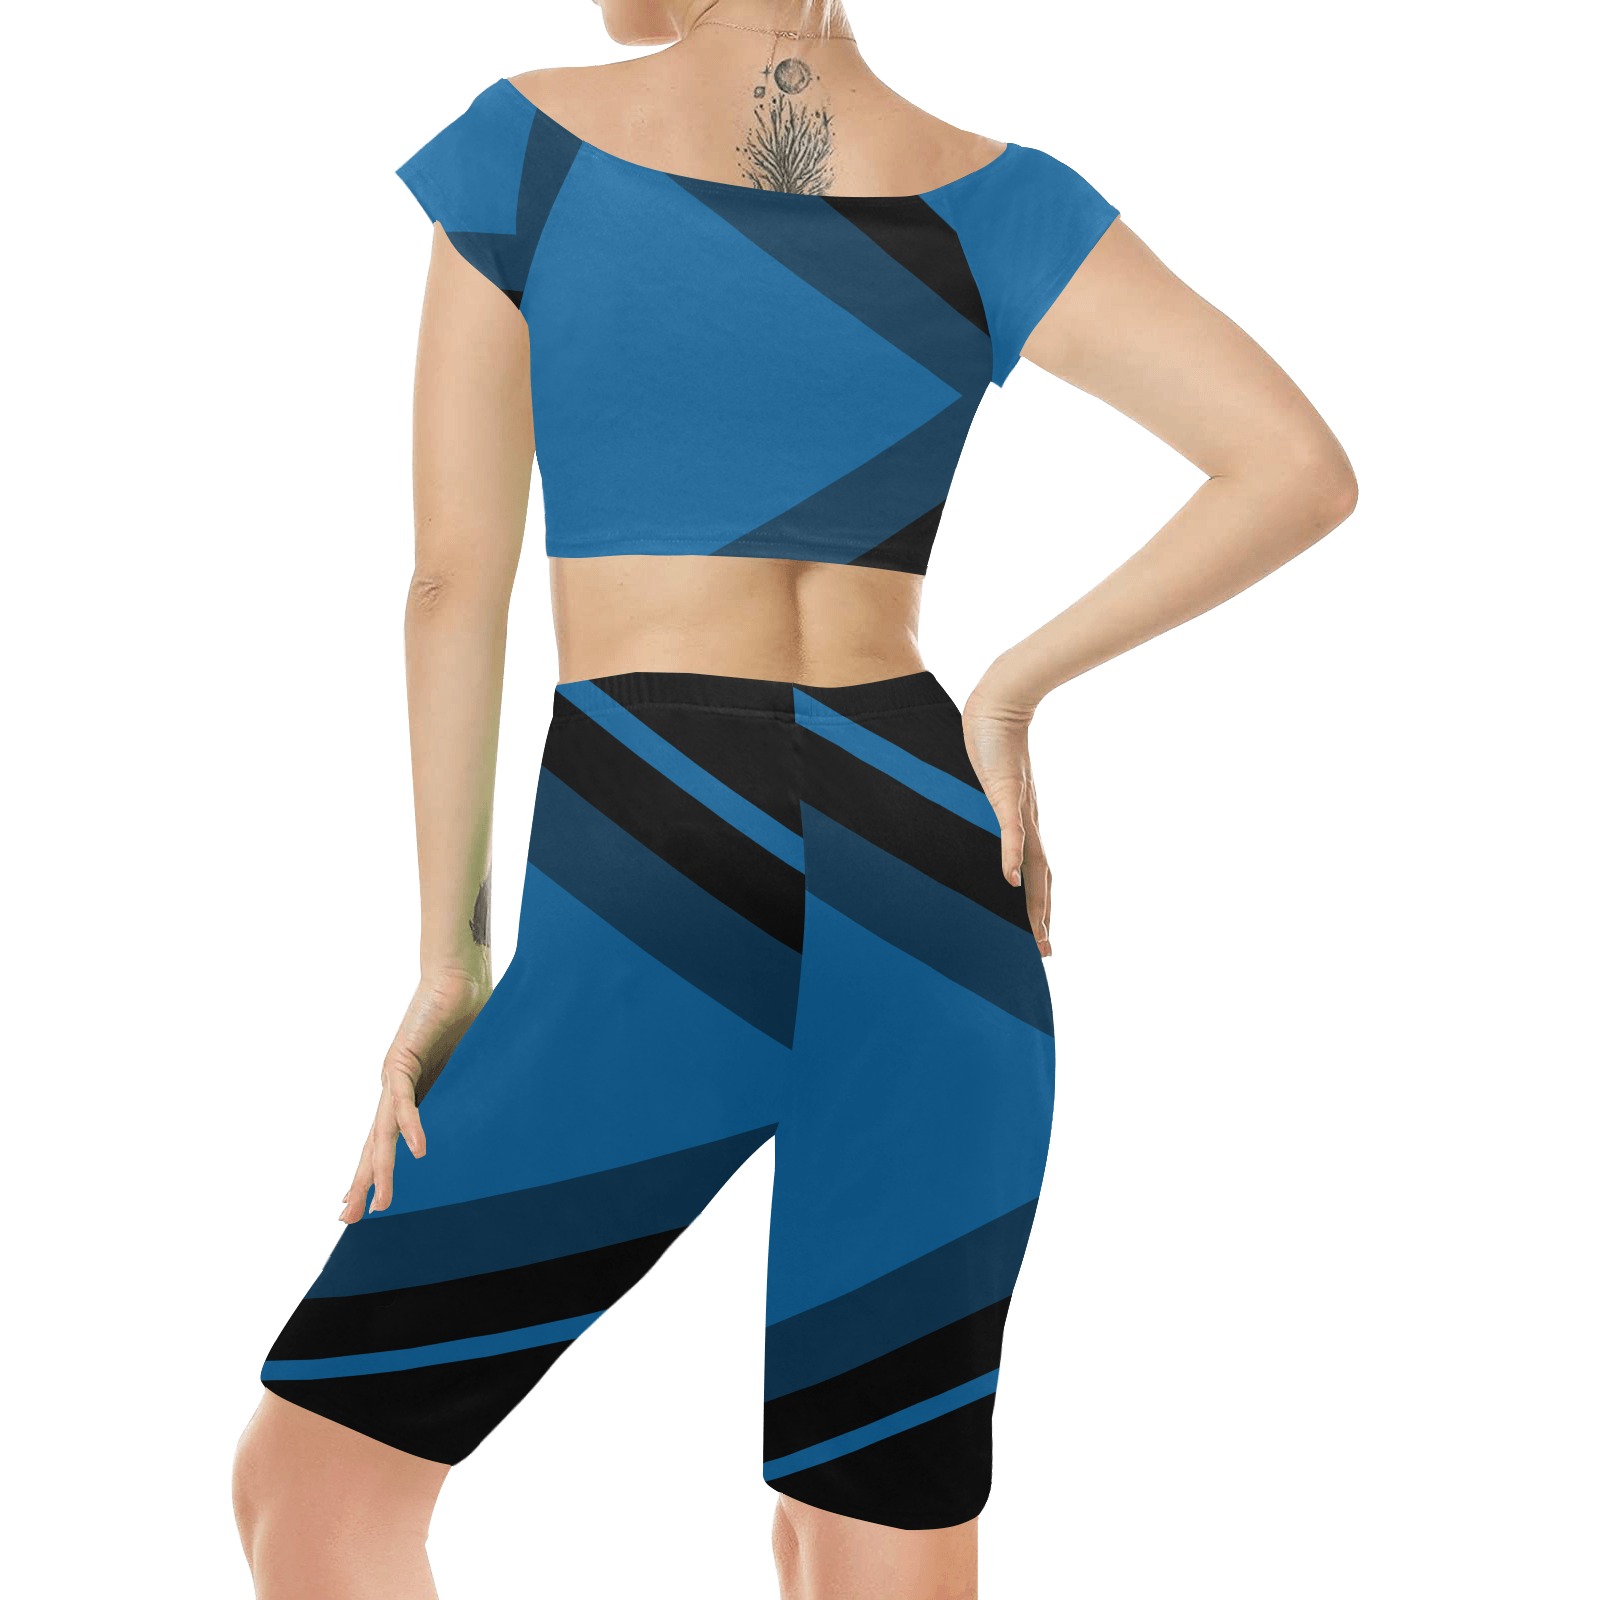 Classic Blue Layers With Black Women's Crop Top Yoga Set